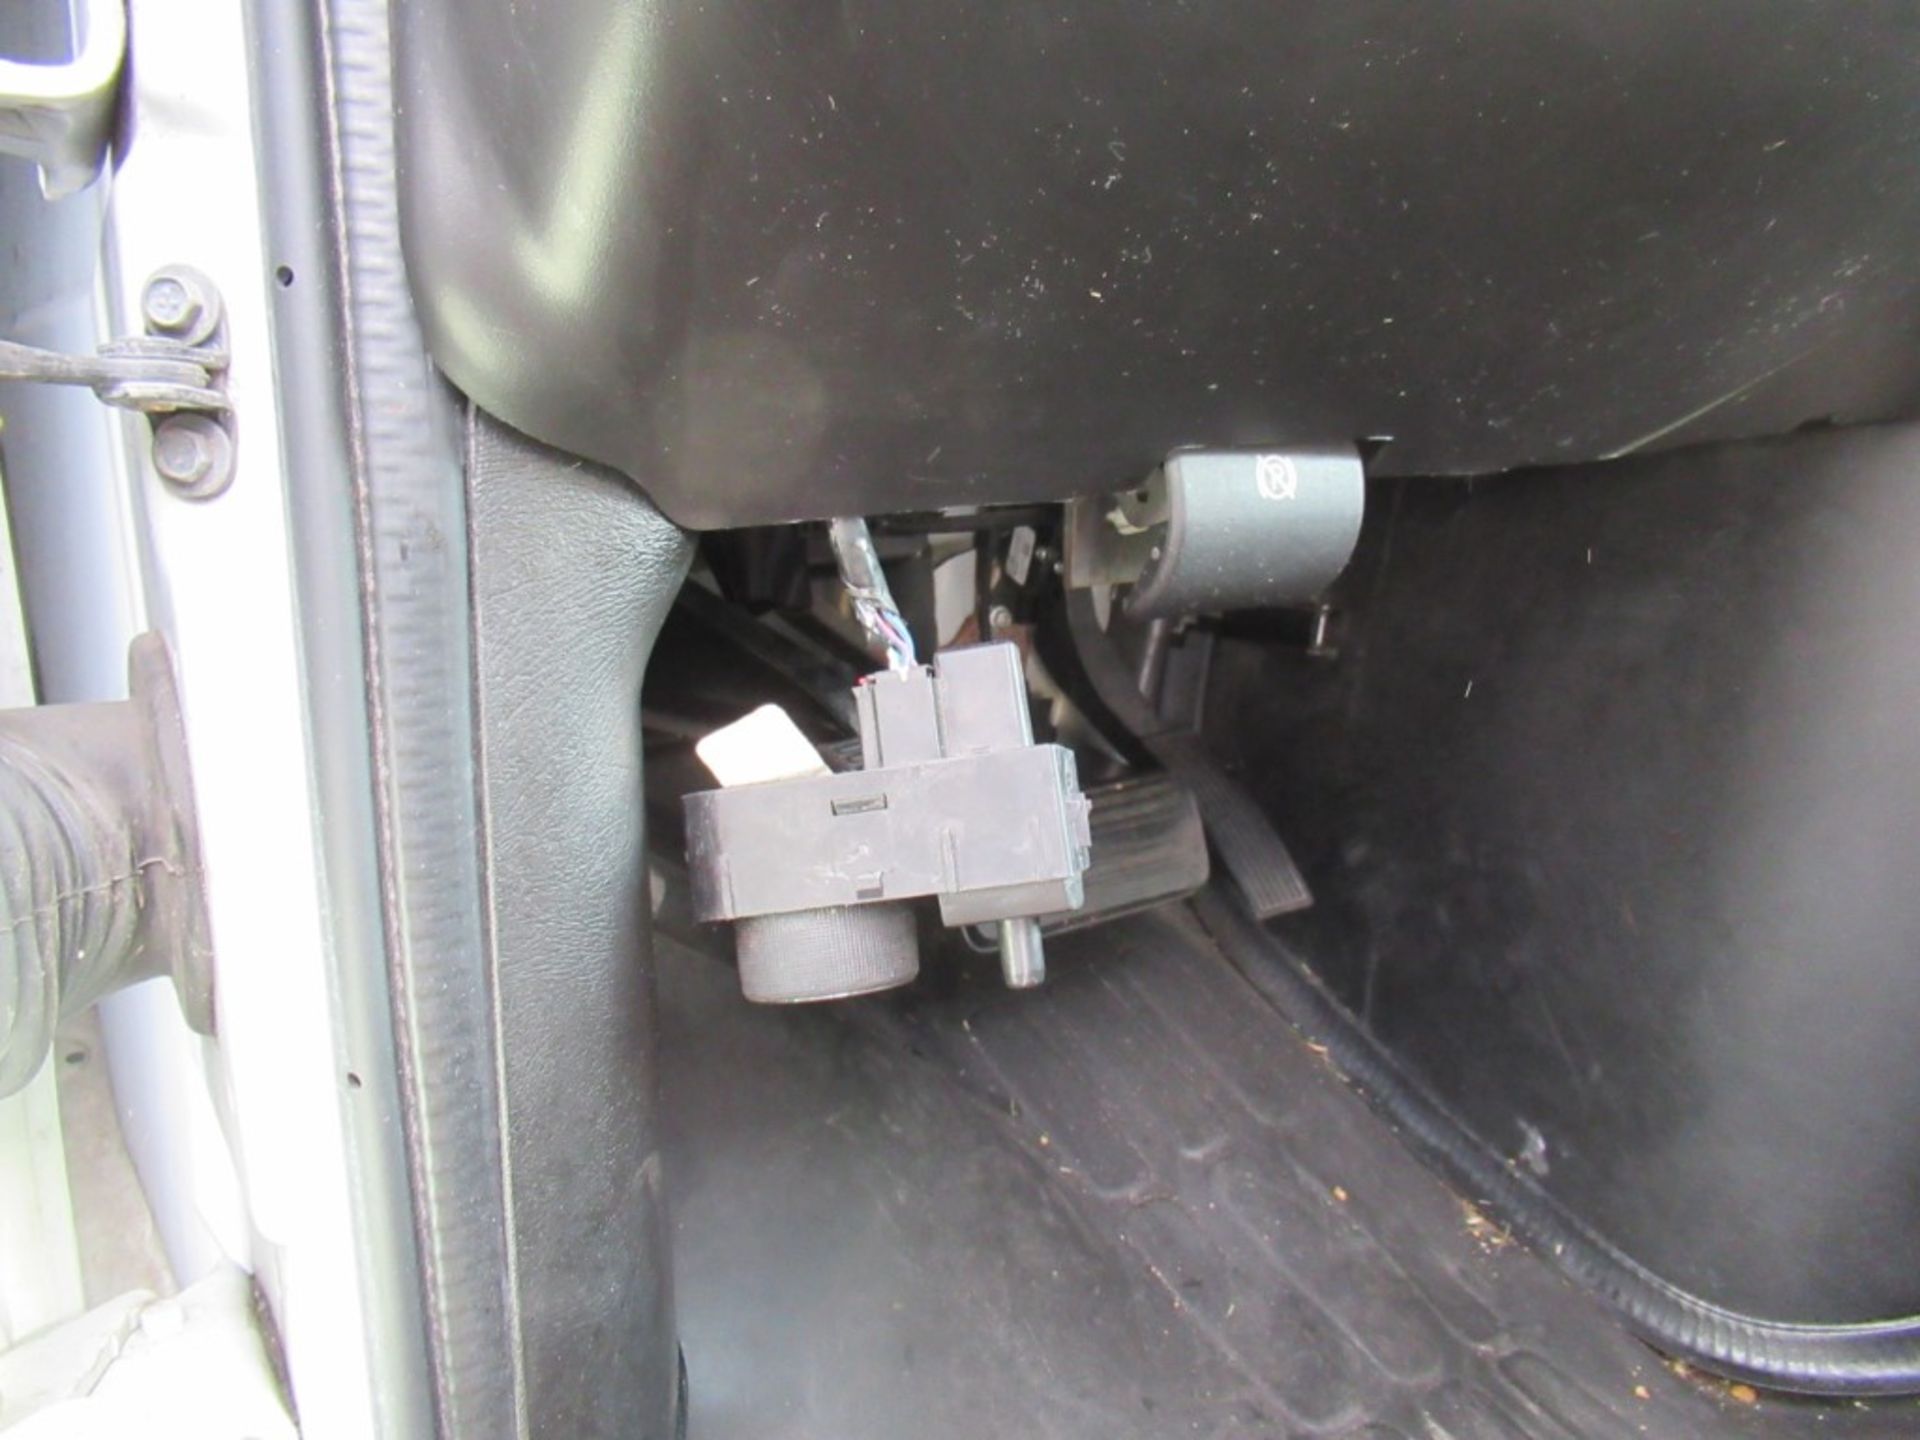 2012 Chevrolet Express Cargo Van, VIN 1GCWGGBA8C1154264, Automatic, AC, AM/FM, Towing, Cracked - Image 25 of 26